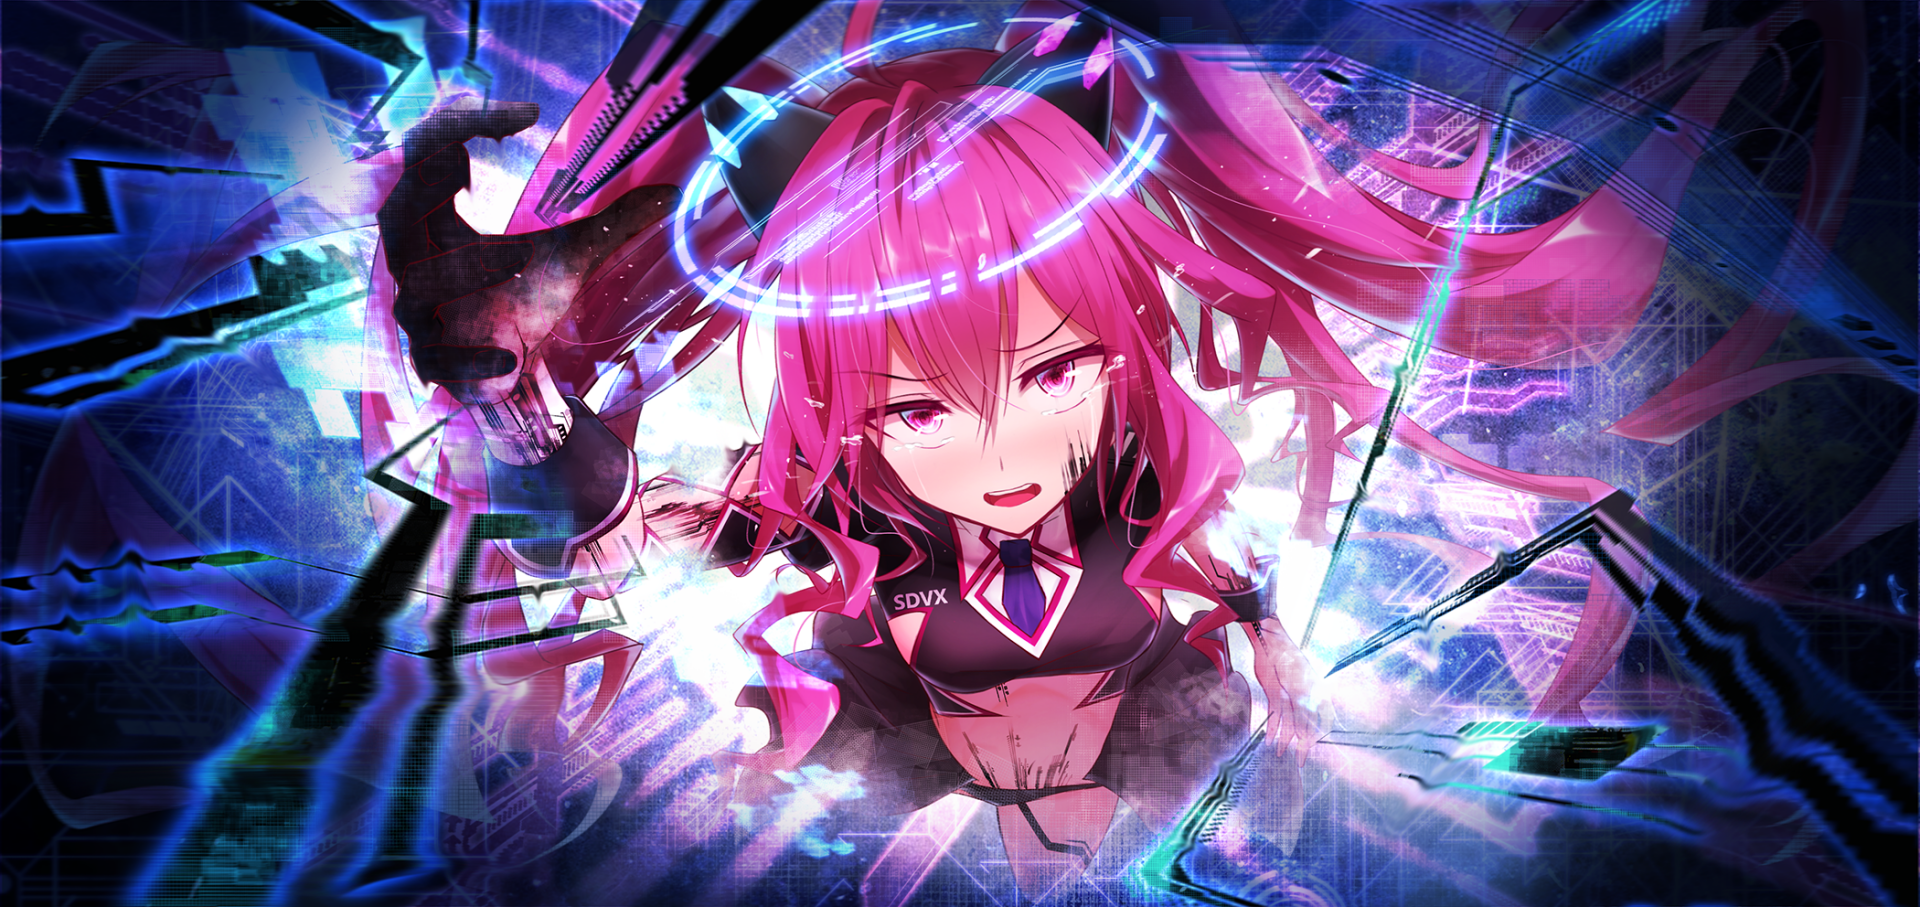 3 Sound Voltex Hd Wallpapers Background Images Wallpaper Abyss